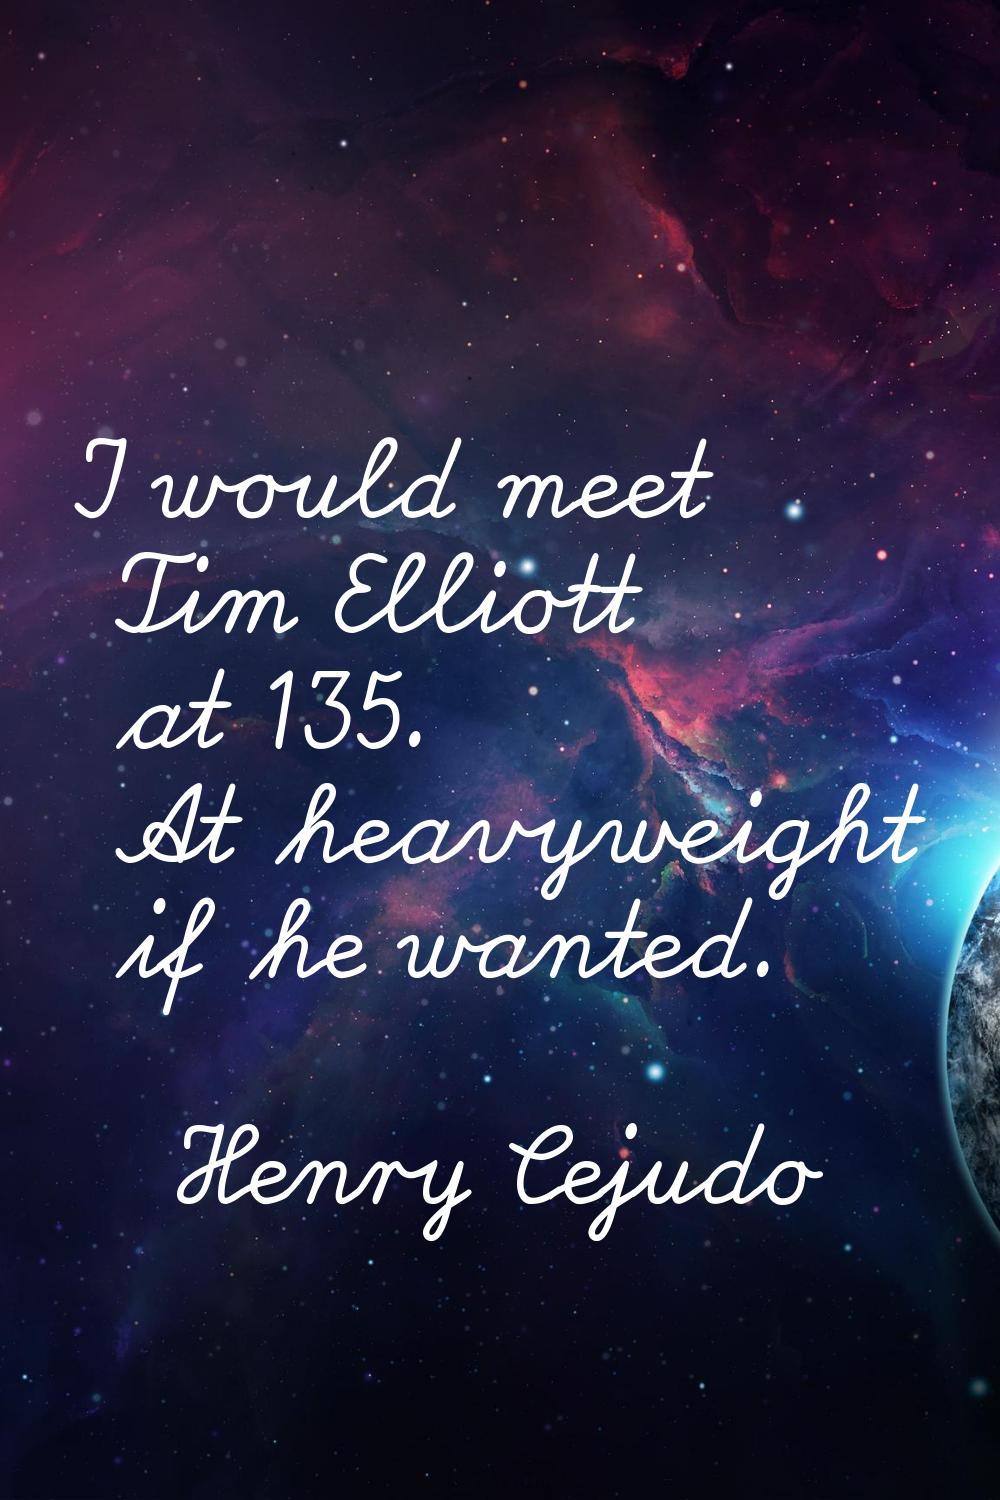 I would meet Tim Elliott at 135. At heavyweight if he wanted.